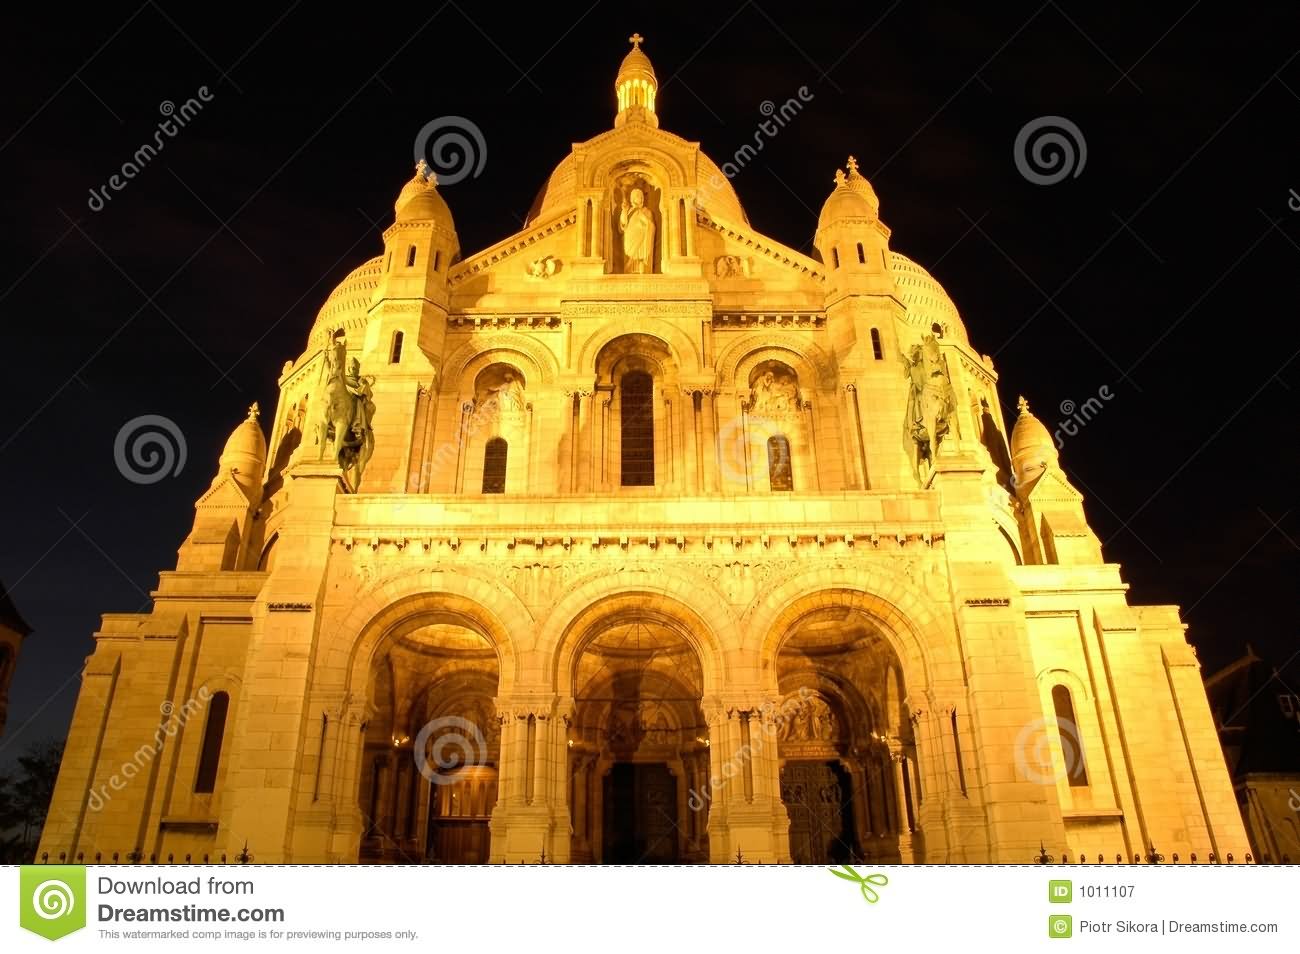 Sacre Coeur Looking Golden At Night